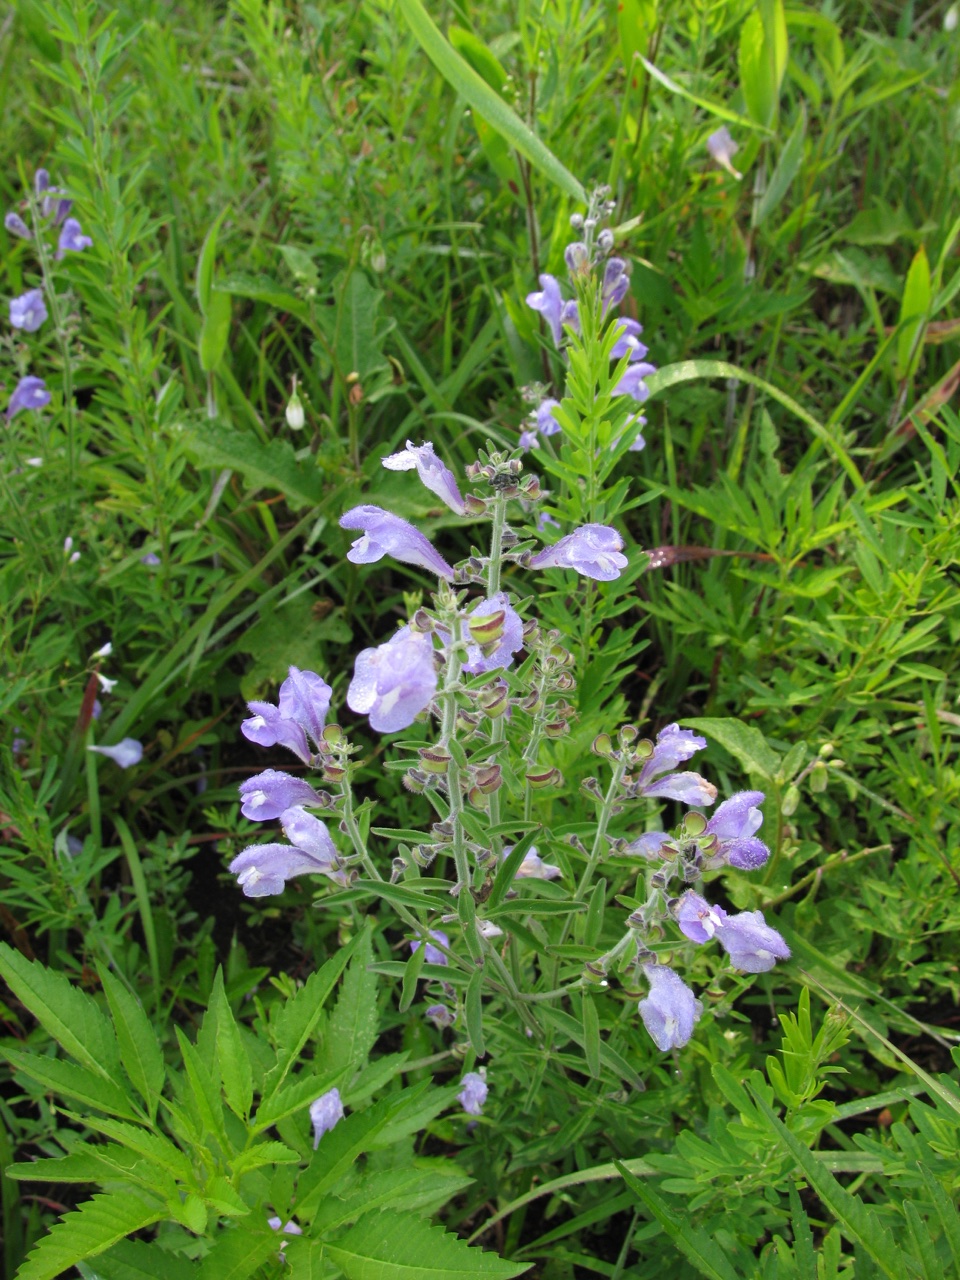 The Scientific Name is Scutellaria integrifolia. You will likely hear them called Narrowleaf Skullcap, Hyssop Skullcap, Helmet Skullcap, Helmet Flower. This picture shows the Numerous pairs of narrowly elliptic leaves and leafy bracts subtending the flowers of Scutellaria integrifolia